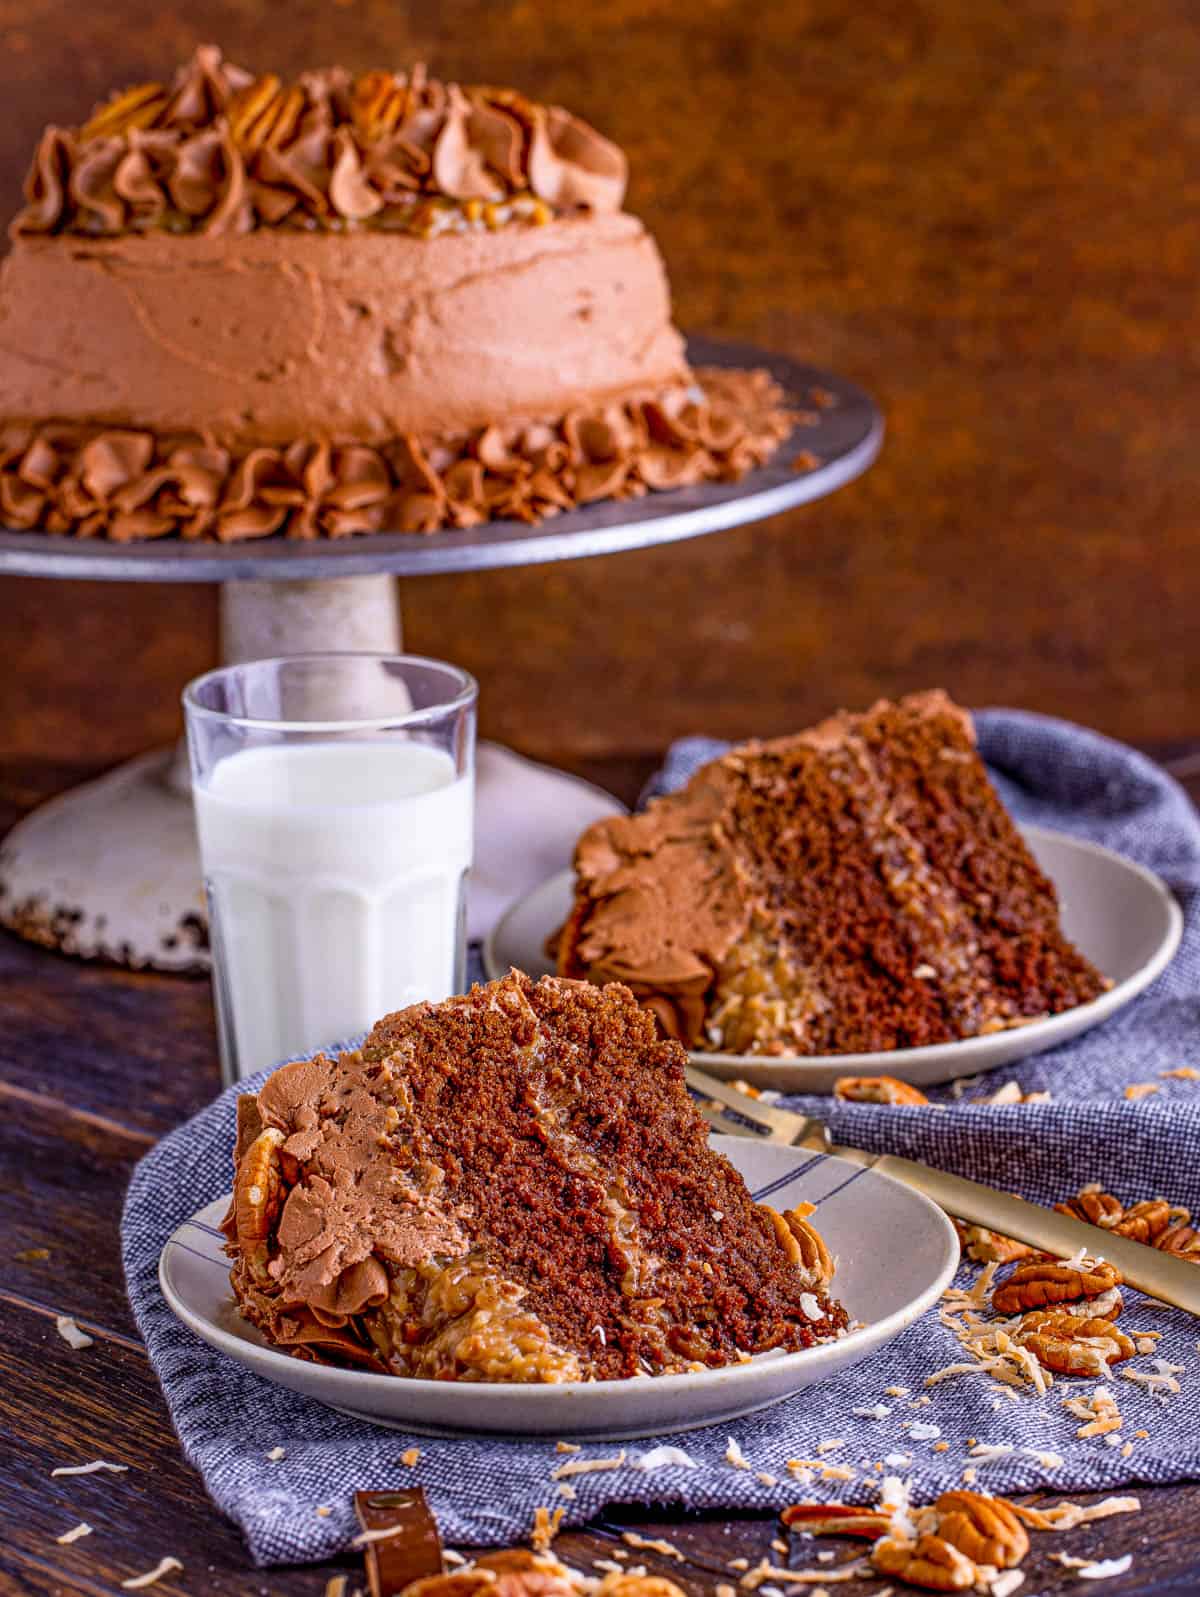 Two slices of the German Chocolate Cake Recipe on plates with cake on stand.